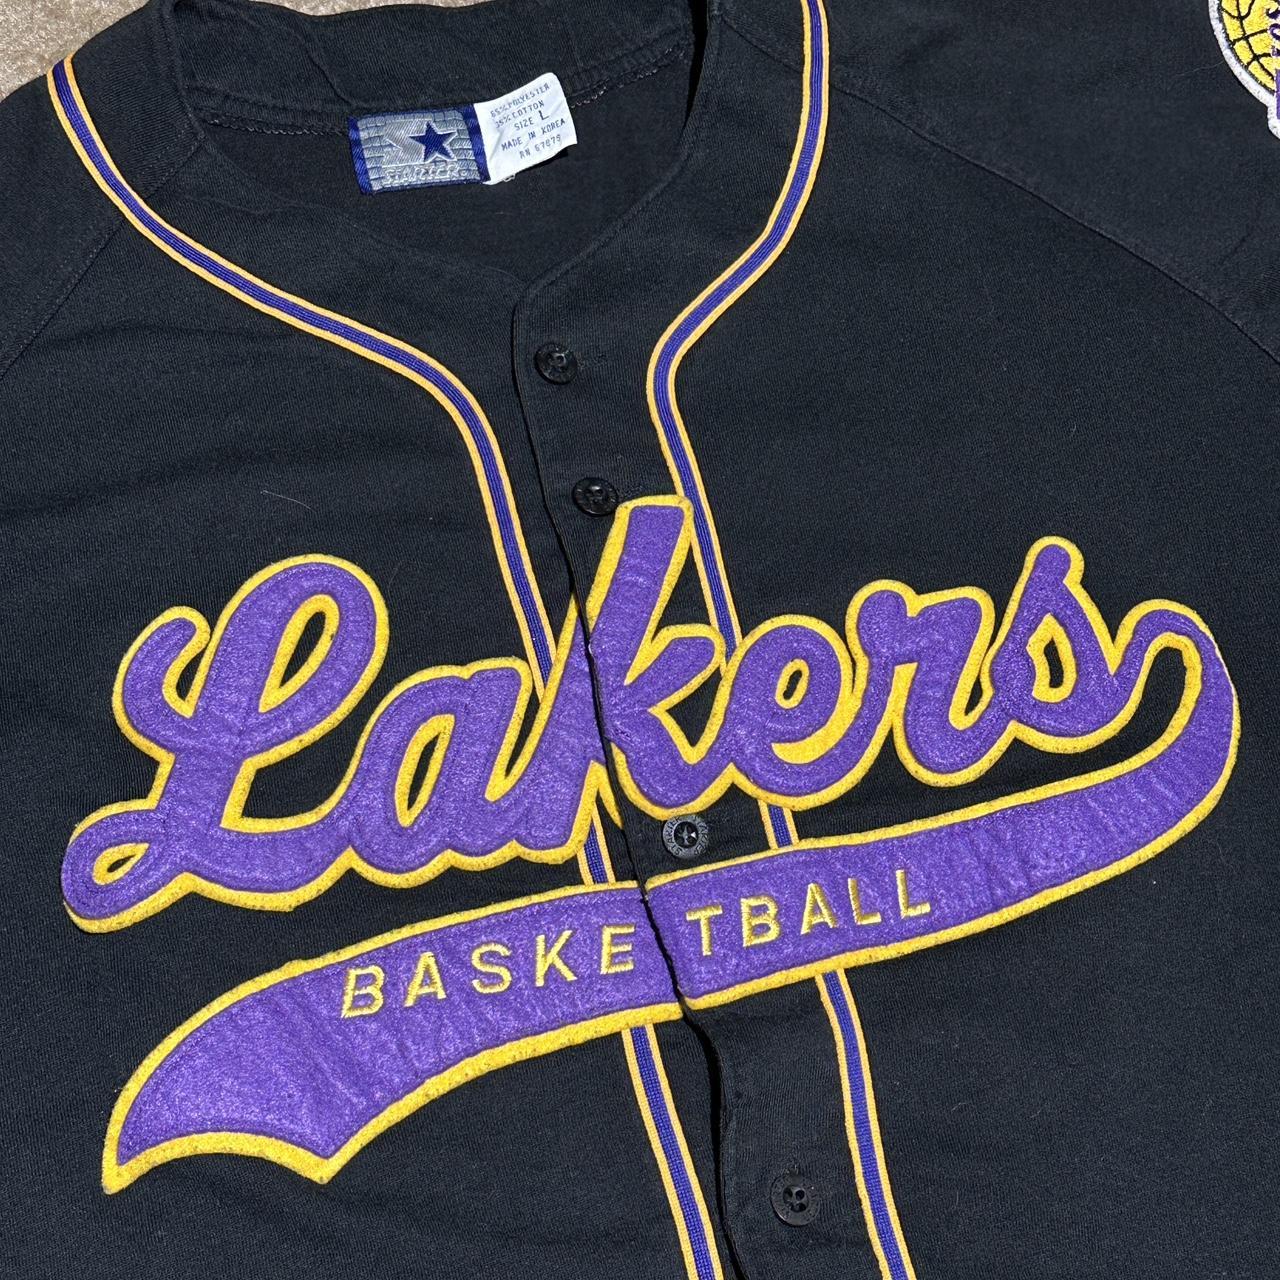 Vintage LA Lakers Starter Tank Top 80s NBA basketball – For All To Envy